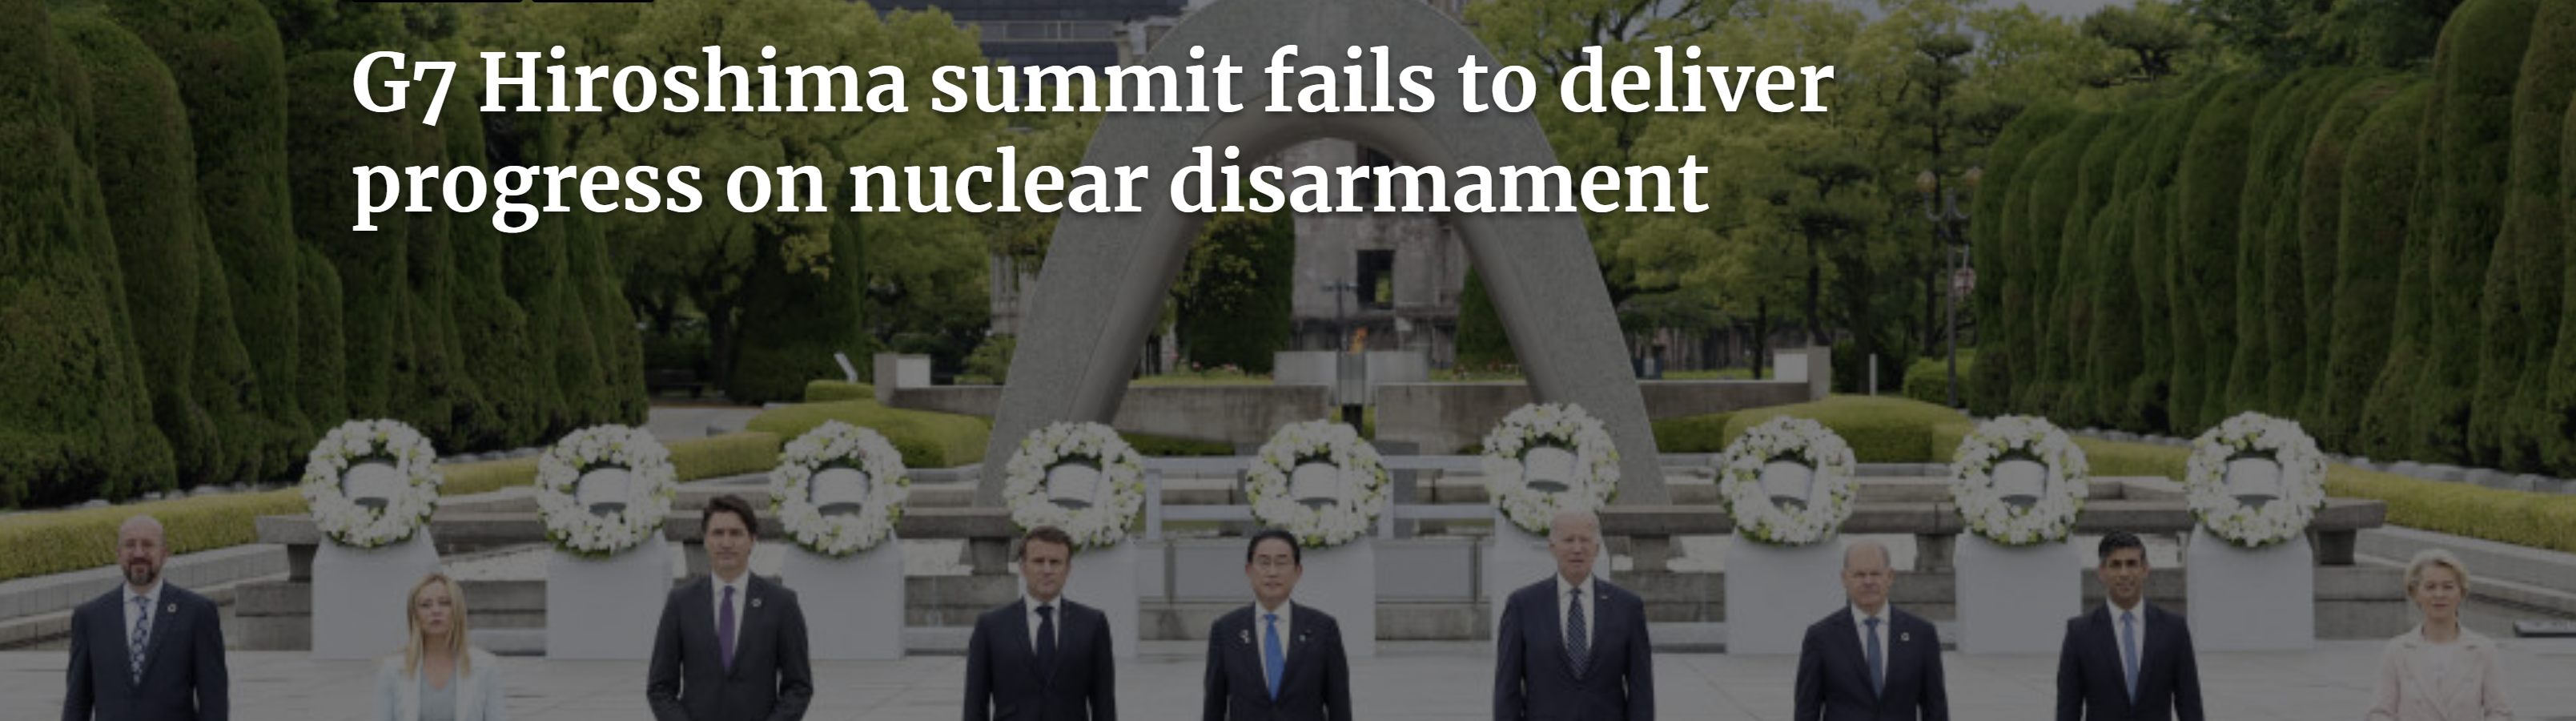 ICAN: G7 Hiroshima summit fails to deliver progress on nuclear disarmament